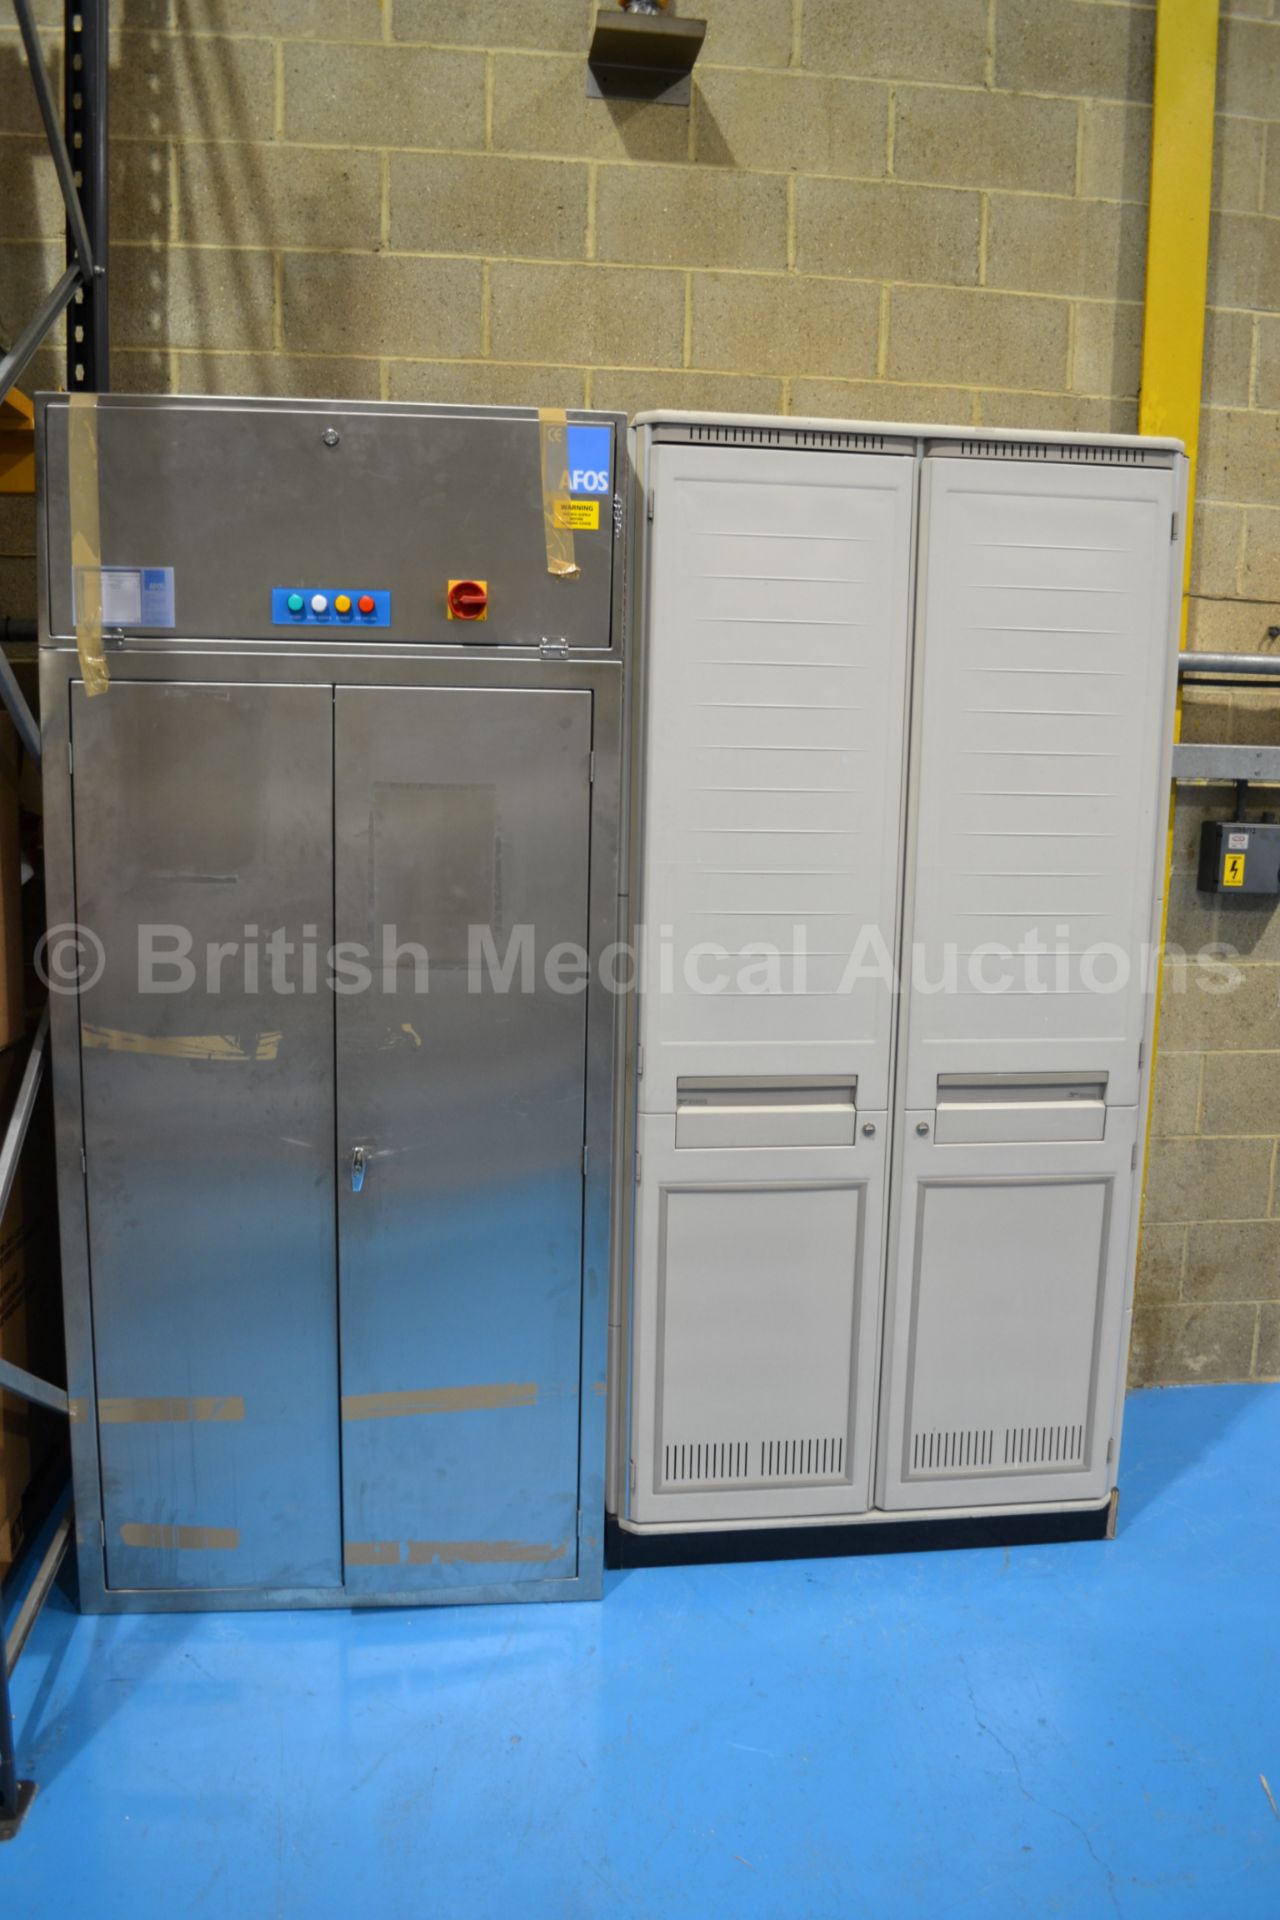 AFOS Endoscope Cabinet and Metro Starsys Endoscope - Image 2 of 5